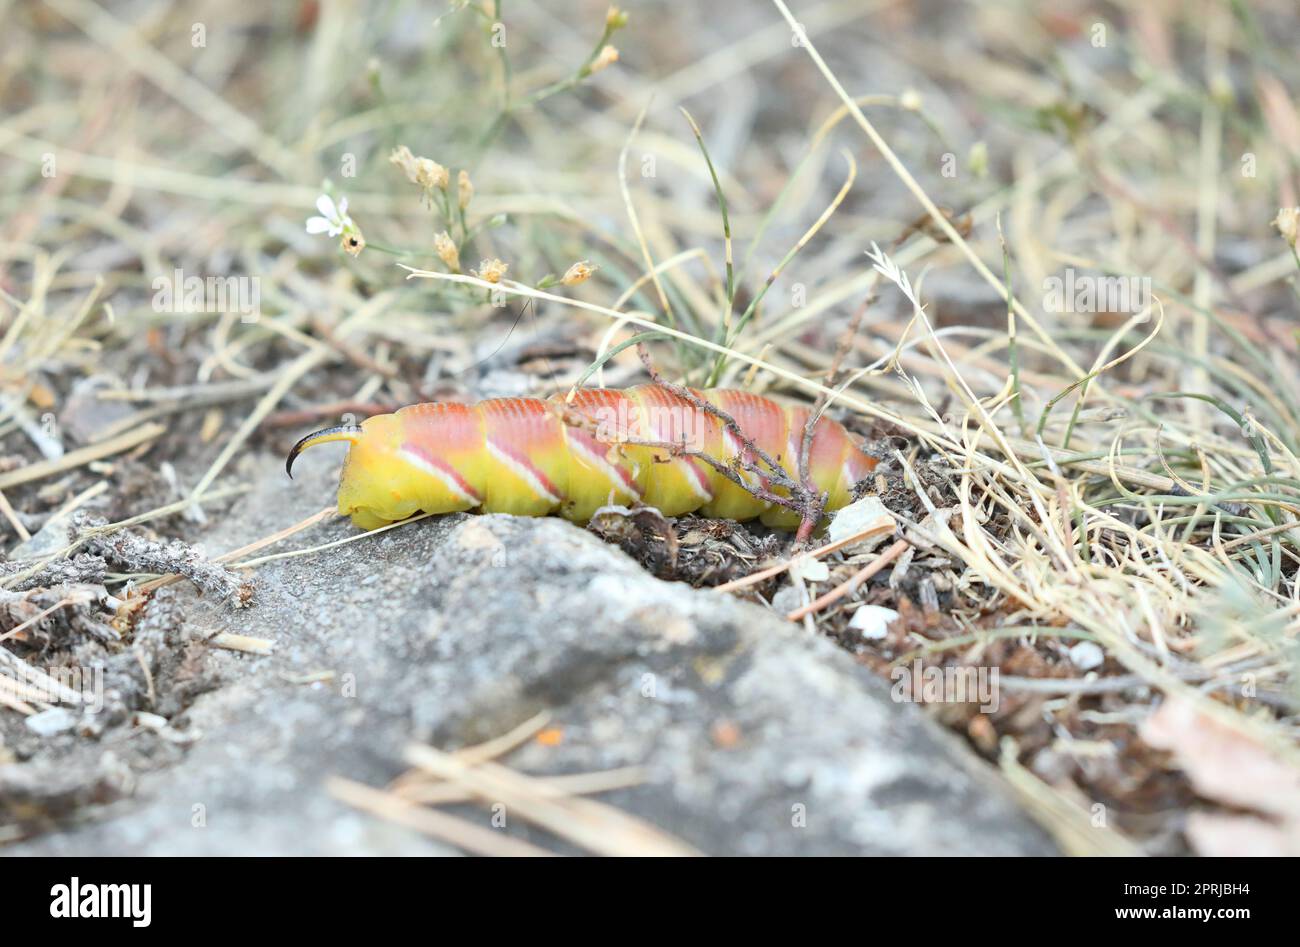 Privet Hawk Moth - Sphinx ligustri - Caterpillar, rare yellow variant burying itself in the earth and preparing to become a pupa Stock Photo